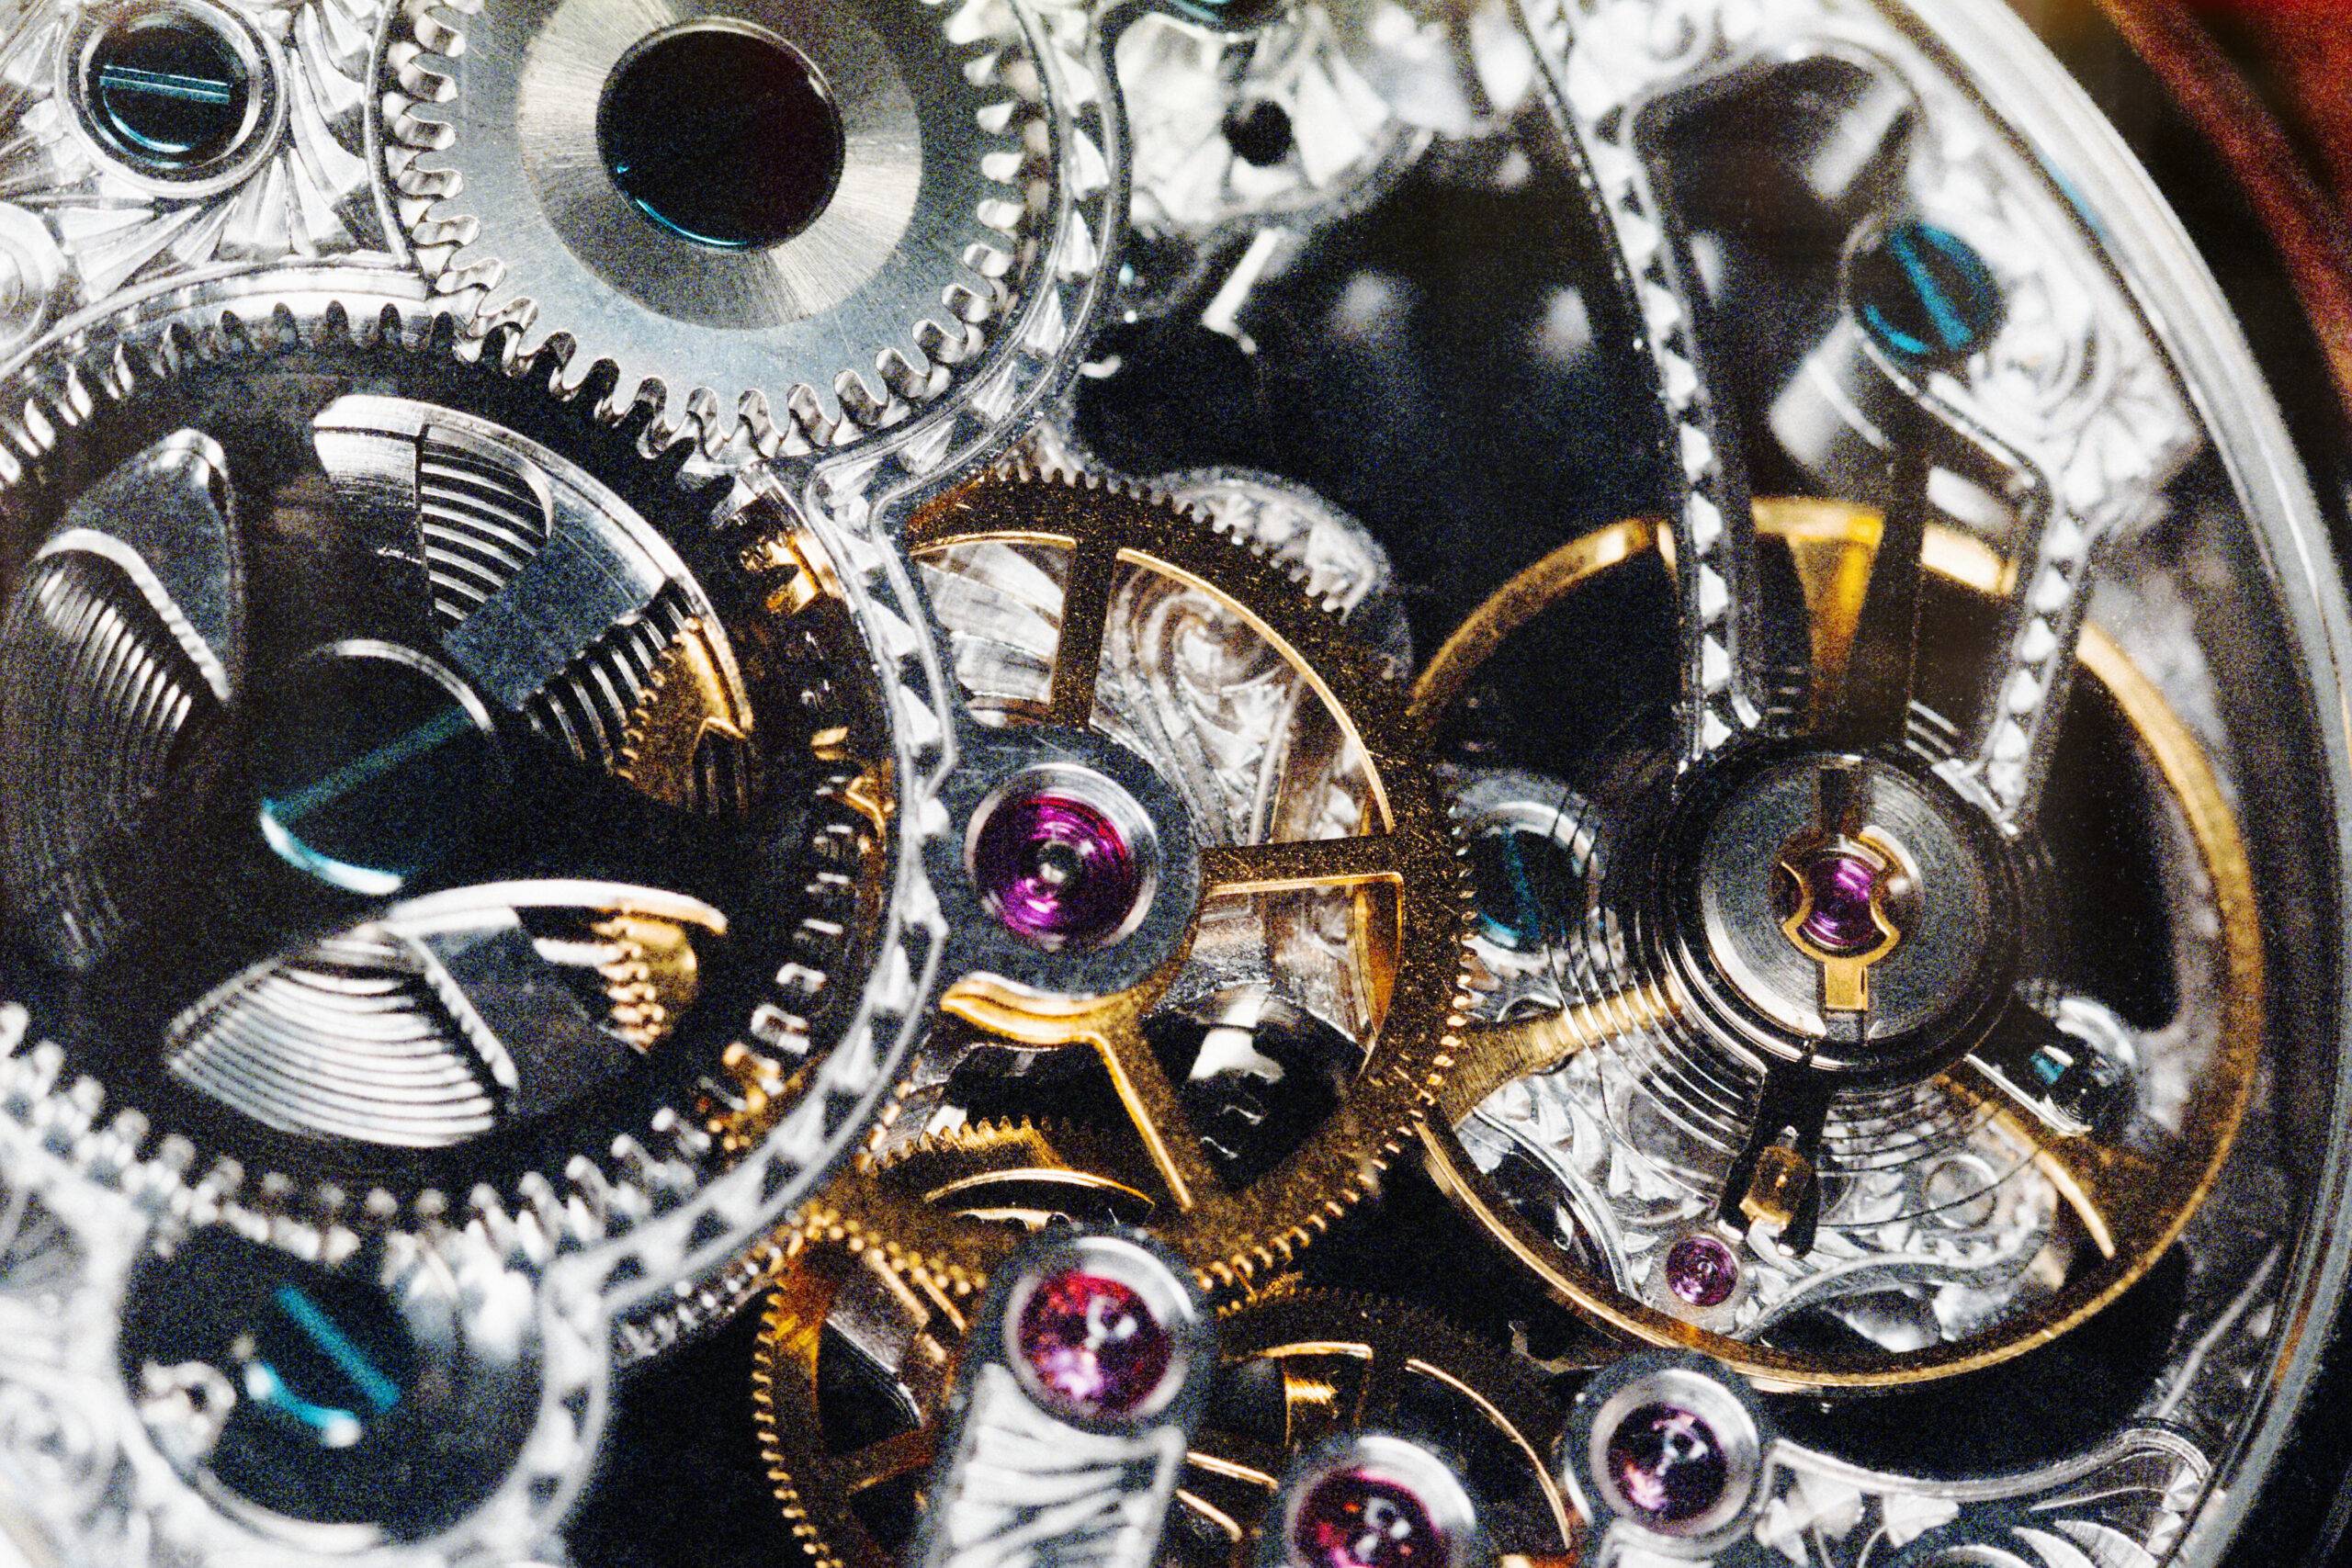 Internal workings of a generic Chinese-made skeleton wristwatch, the mechanism based on a 100-year-old Swiss design.